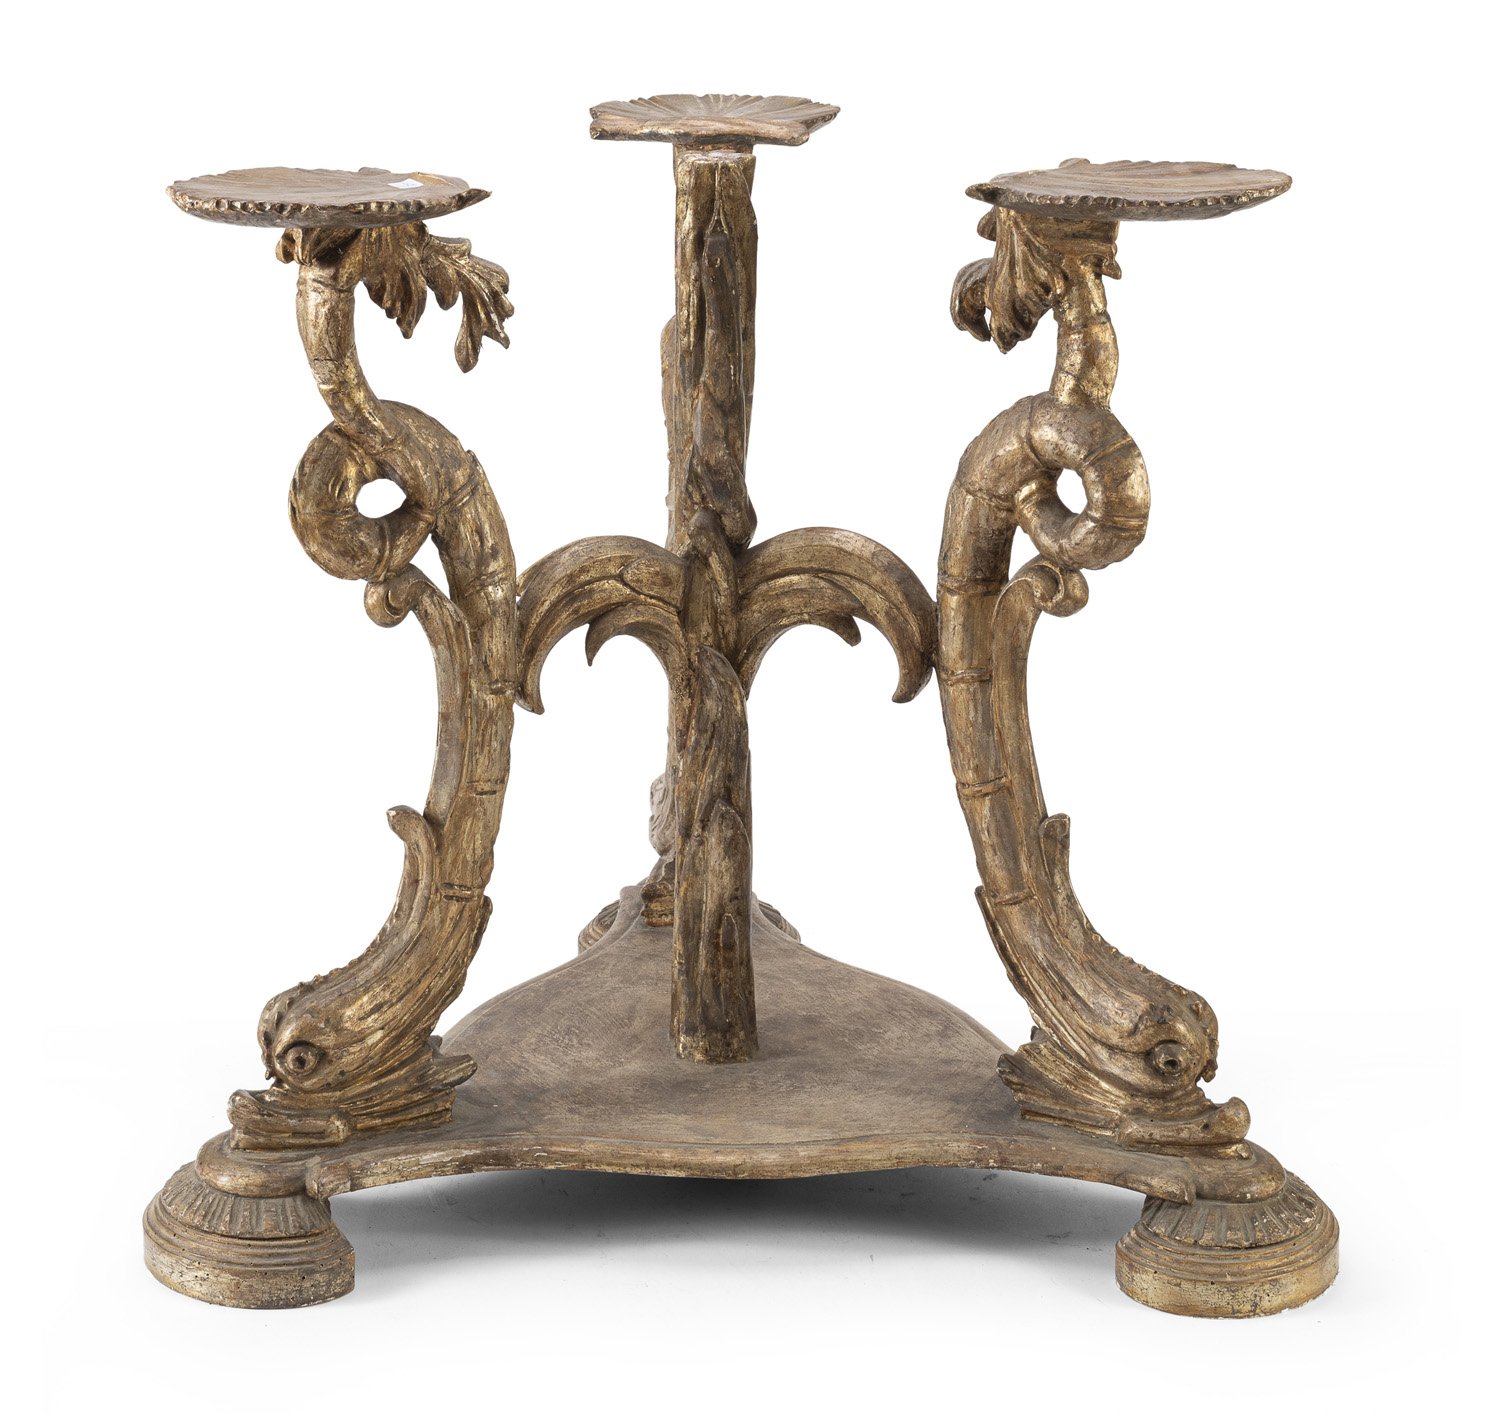 RARE SCULPTURED TABLE BASE IN GILTWOOD VENICE 18th CENTURY - Image 2 of 2